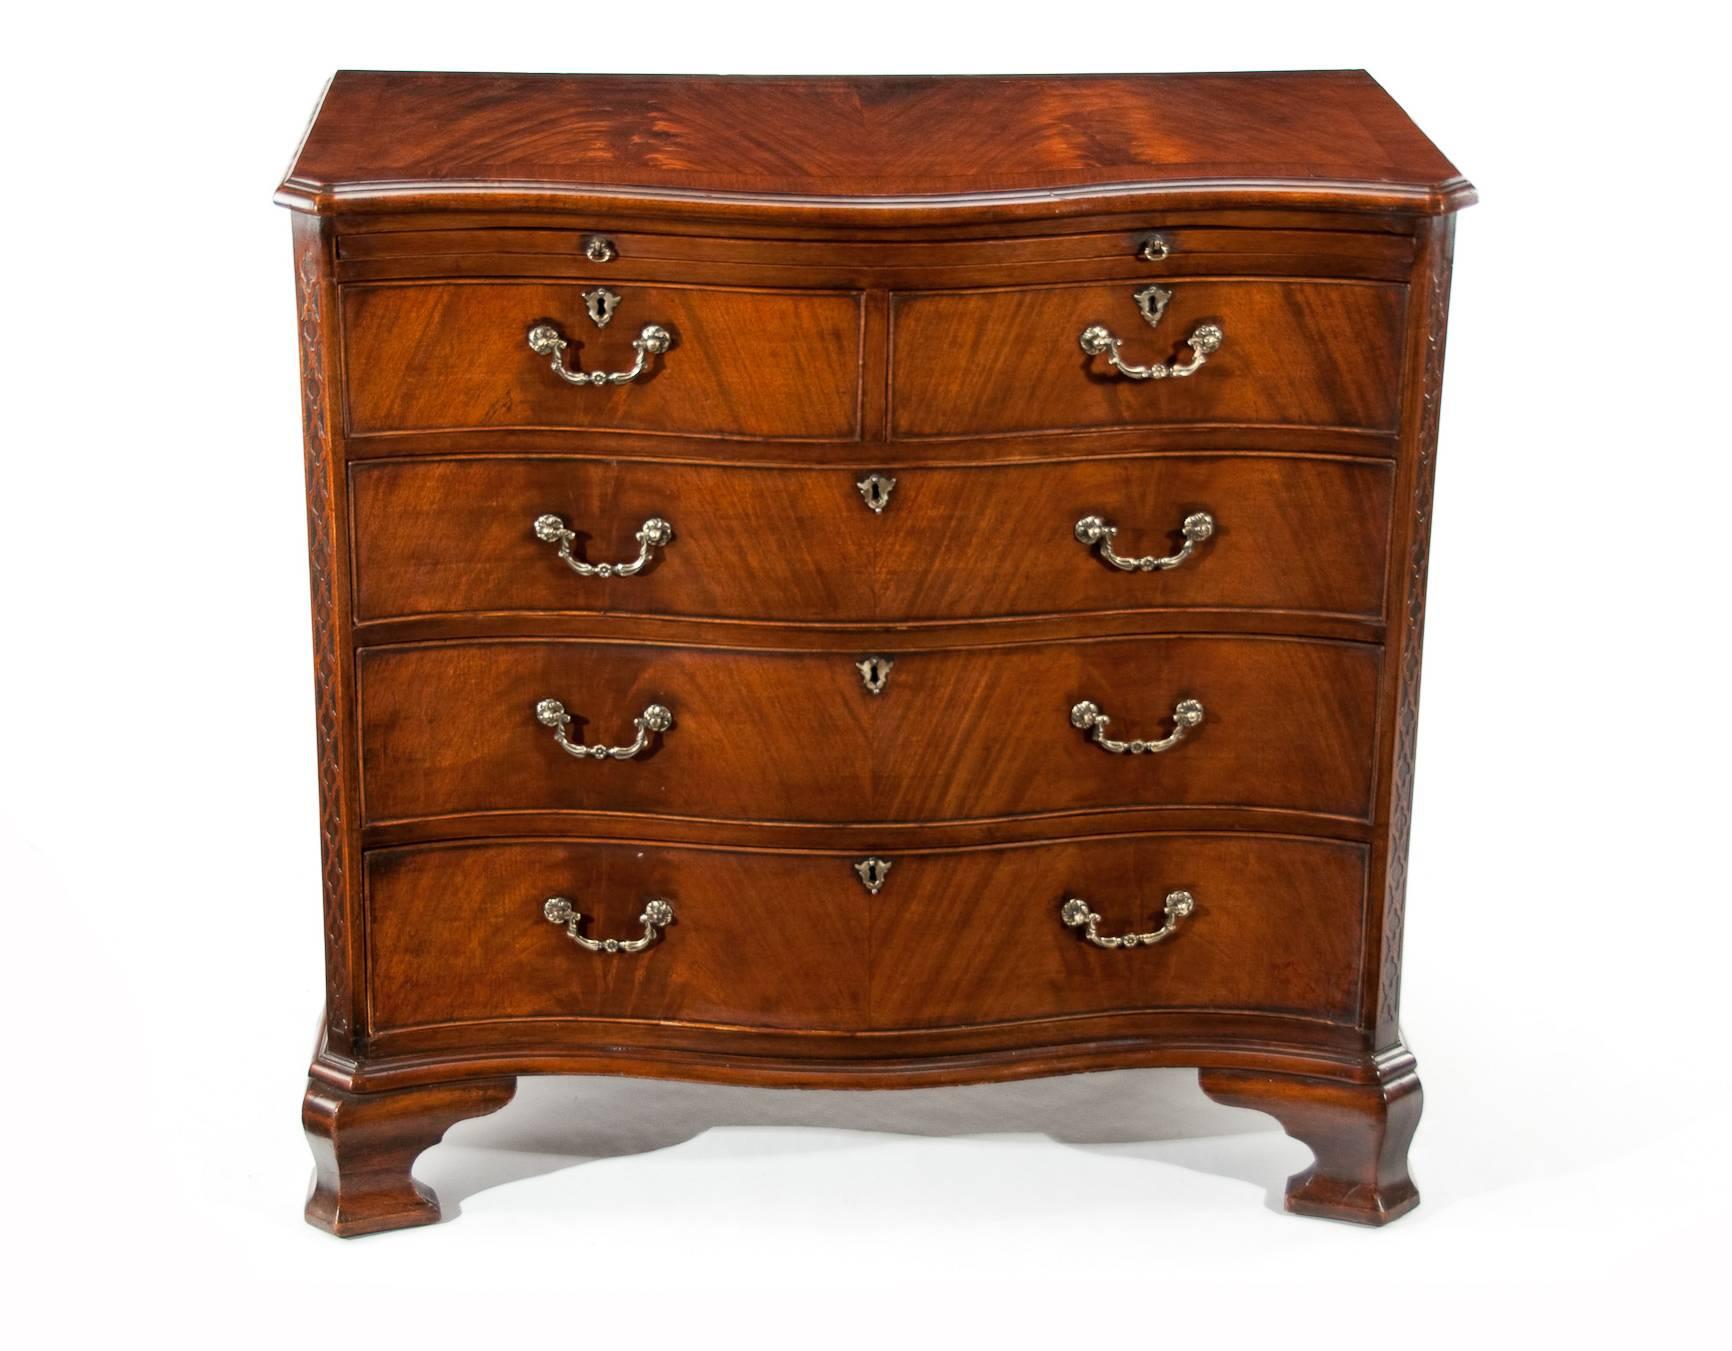 Great Britain (UK) Handsome Antique Mahogany Serpentine Chest of Drawers